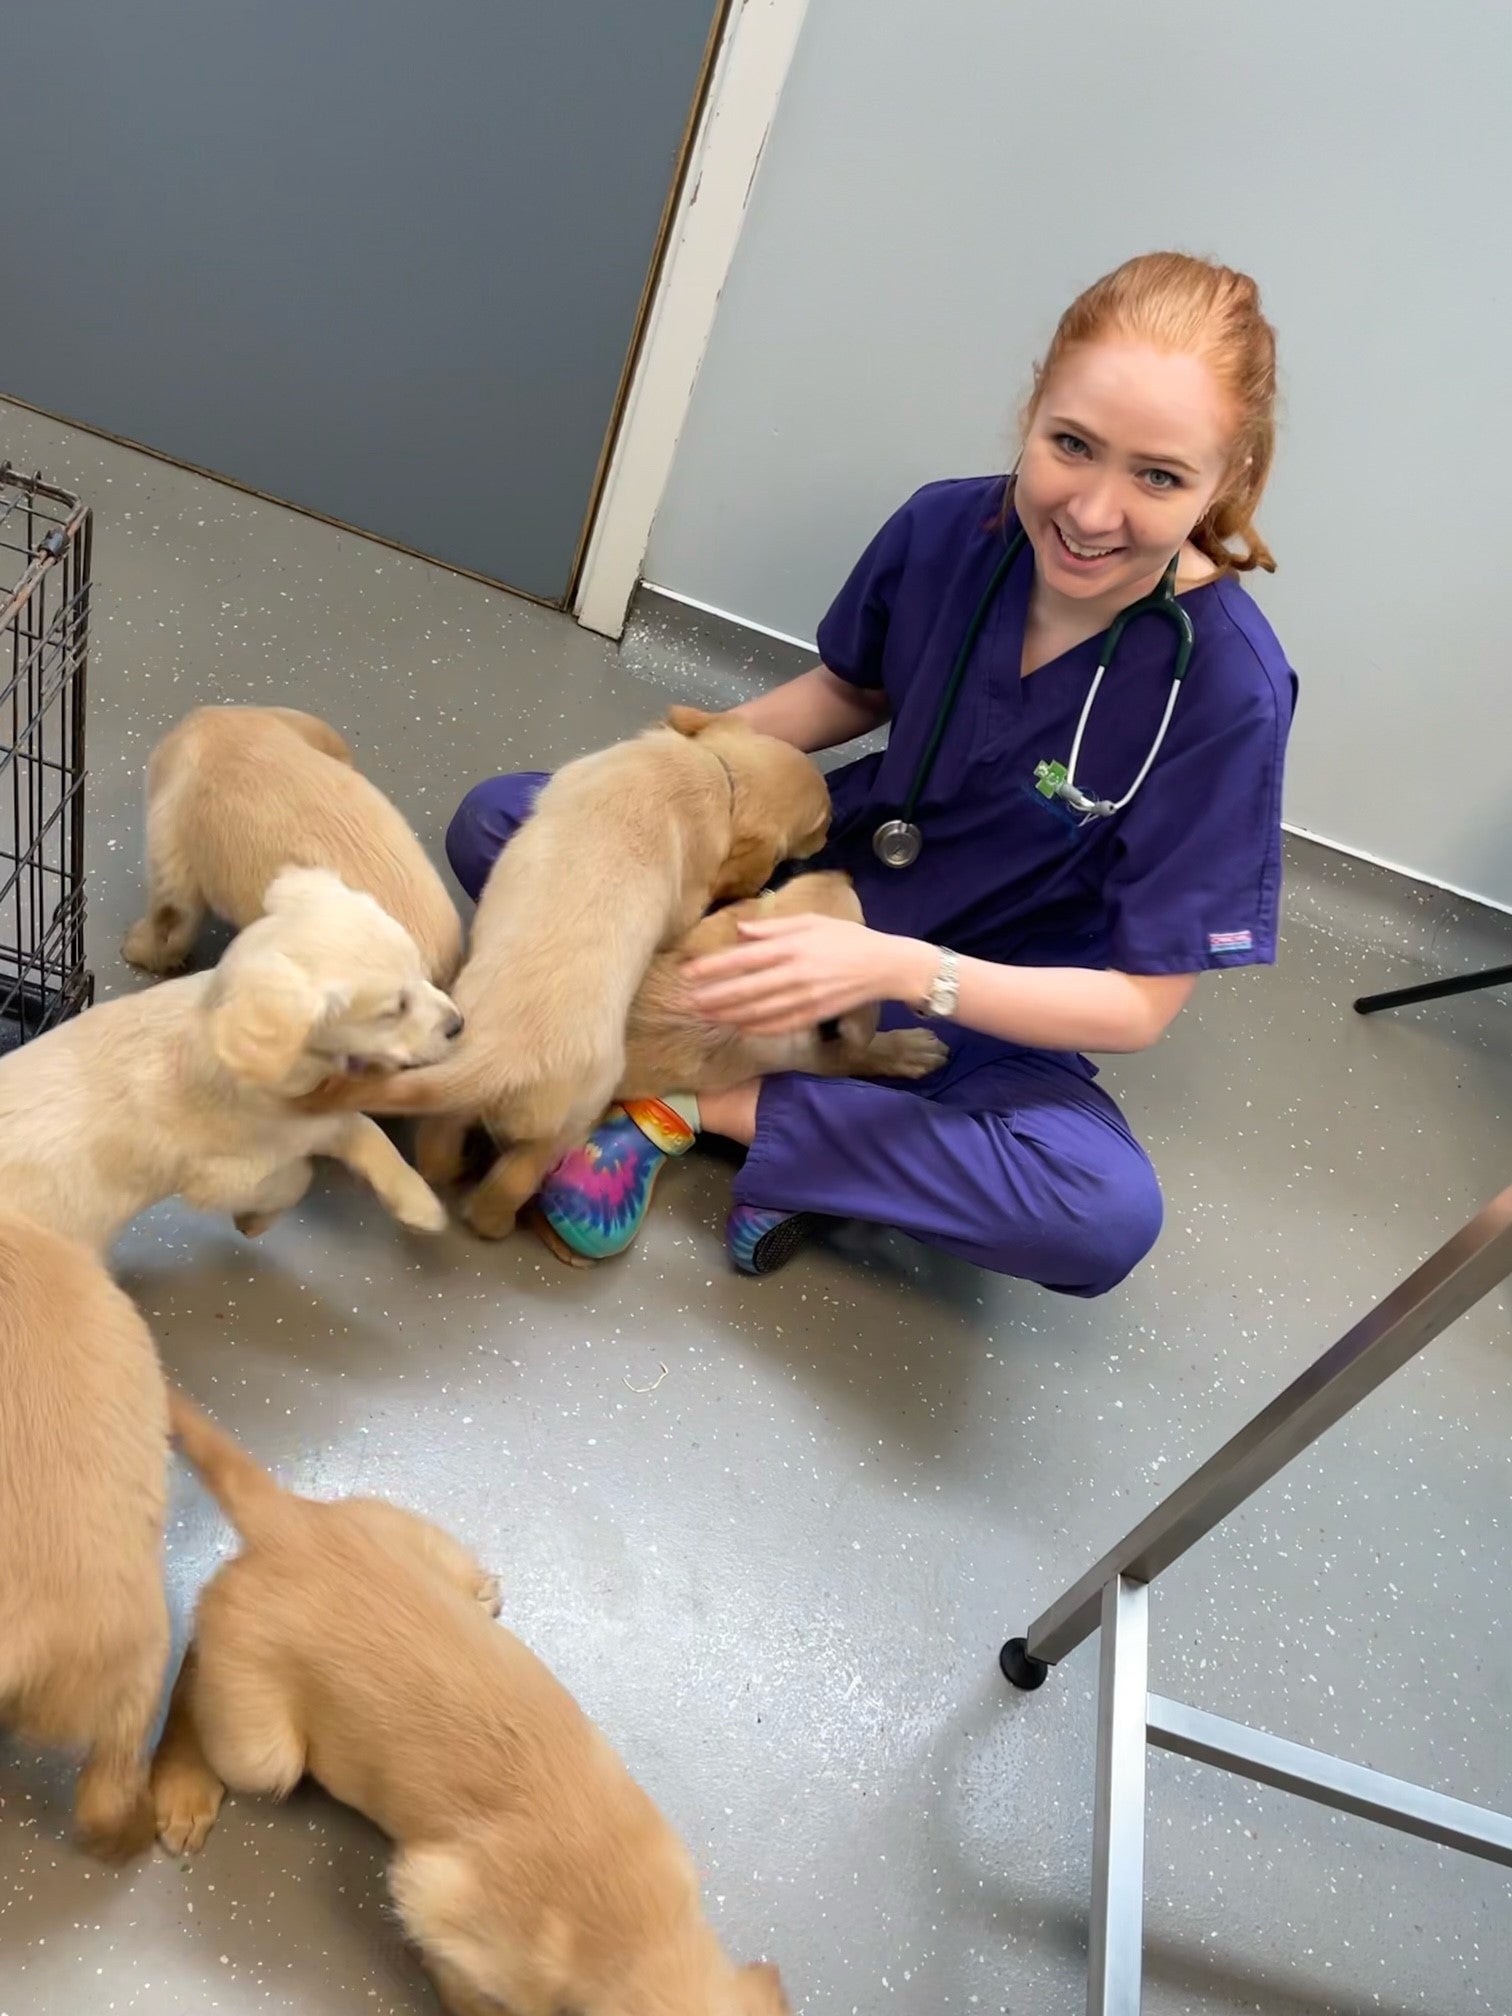 Emma now works as a small animal vet. (Collect/PA Real Life)